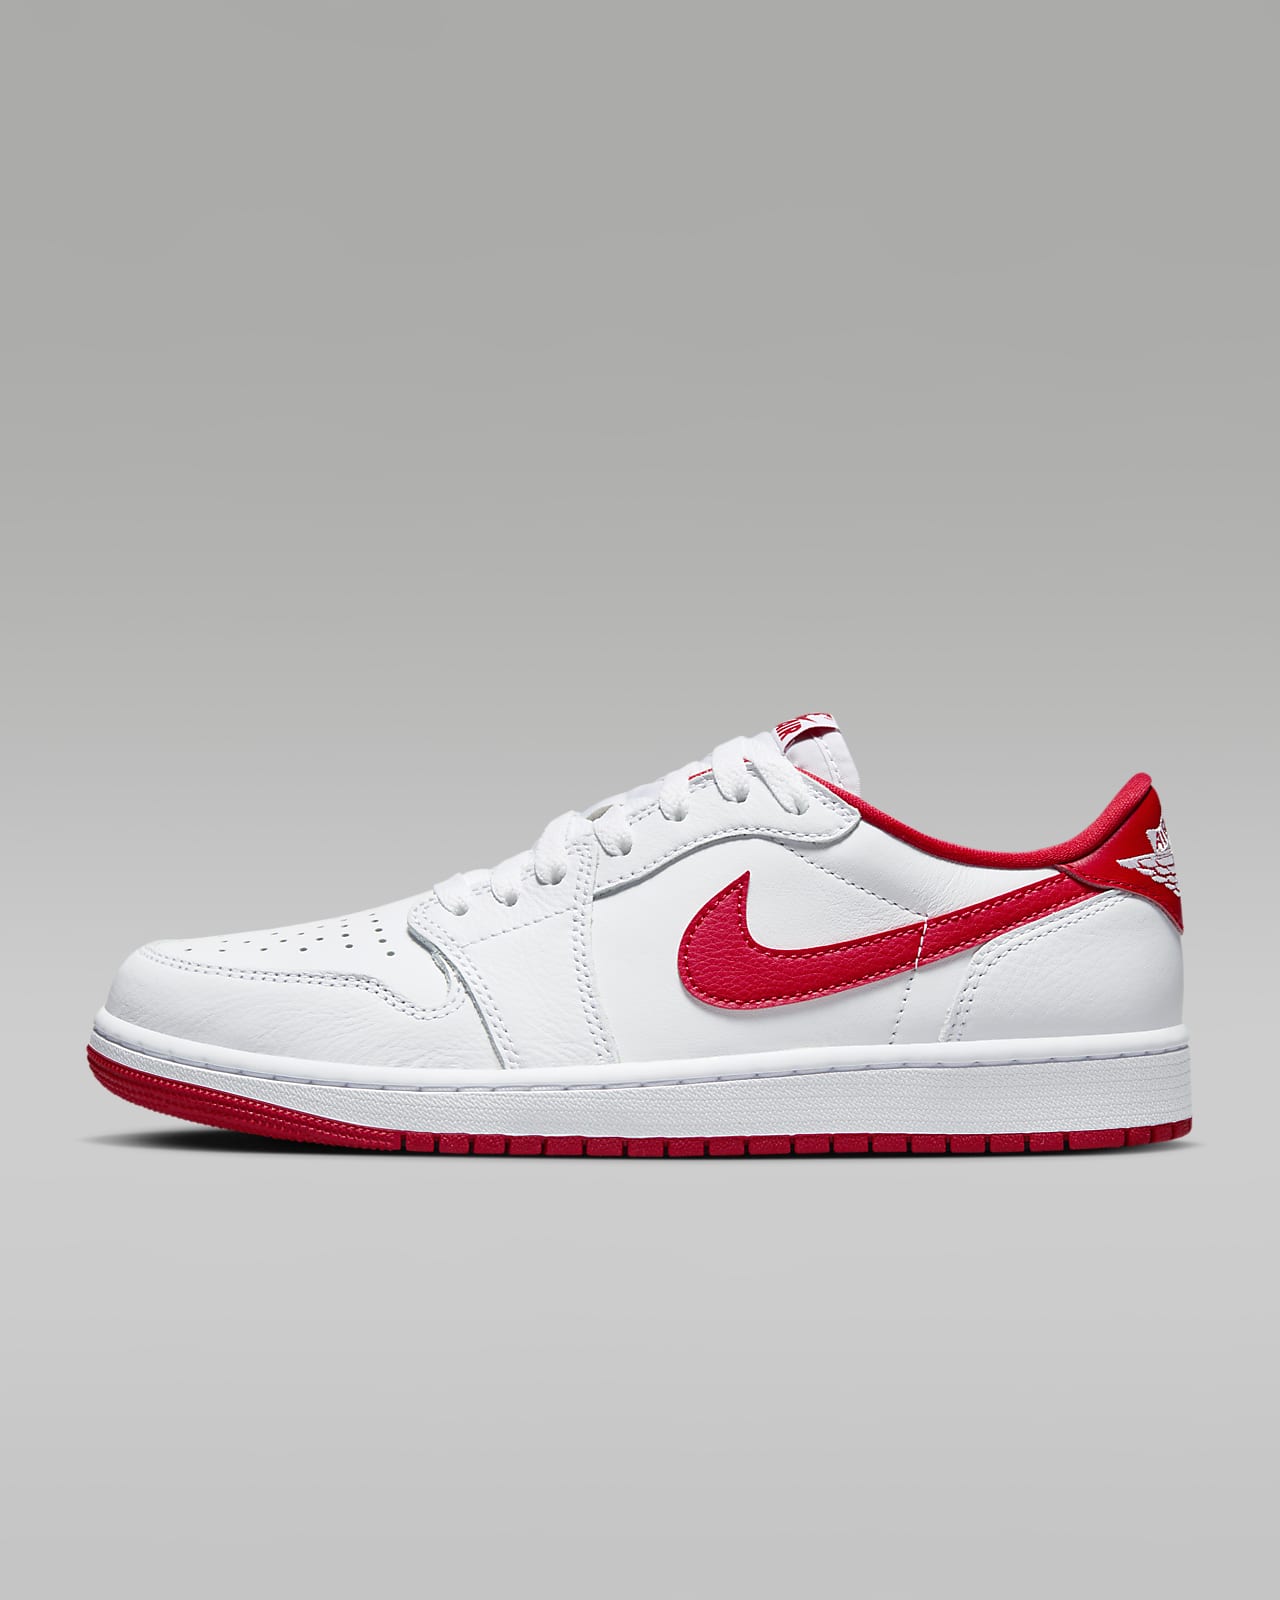 Chaussure Air Jordan 1 Low OG « White/Red » pour homme